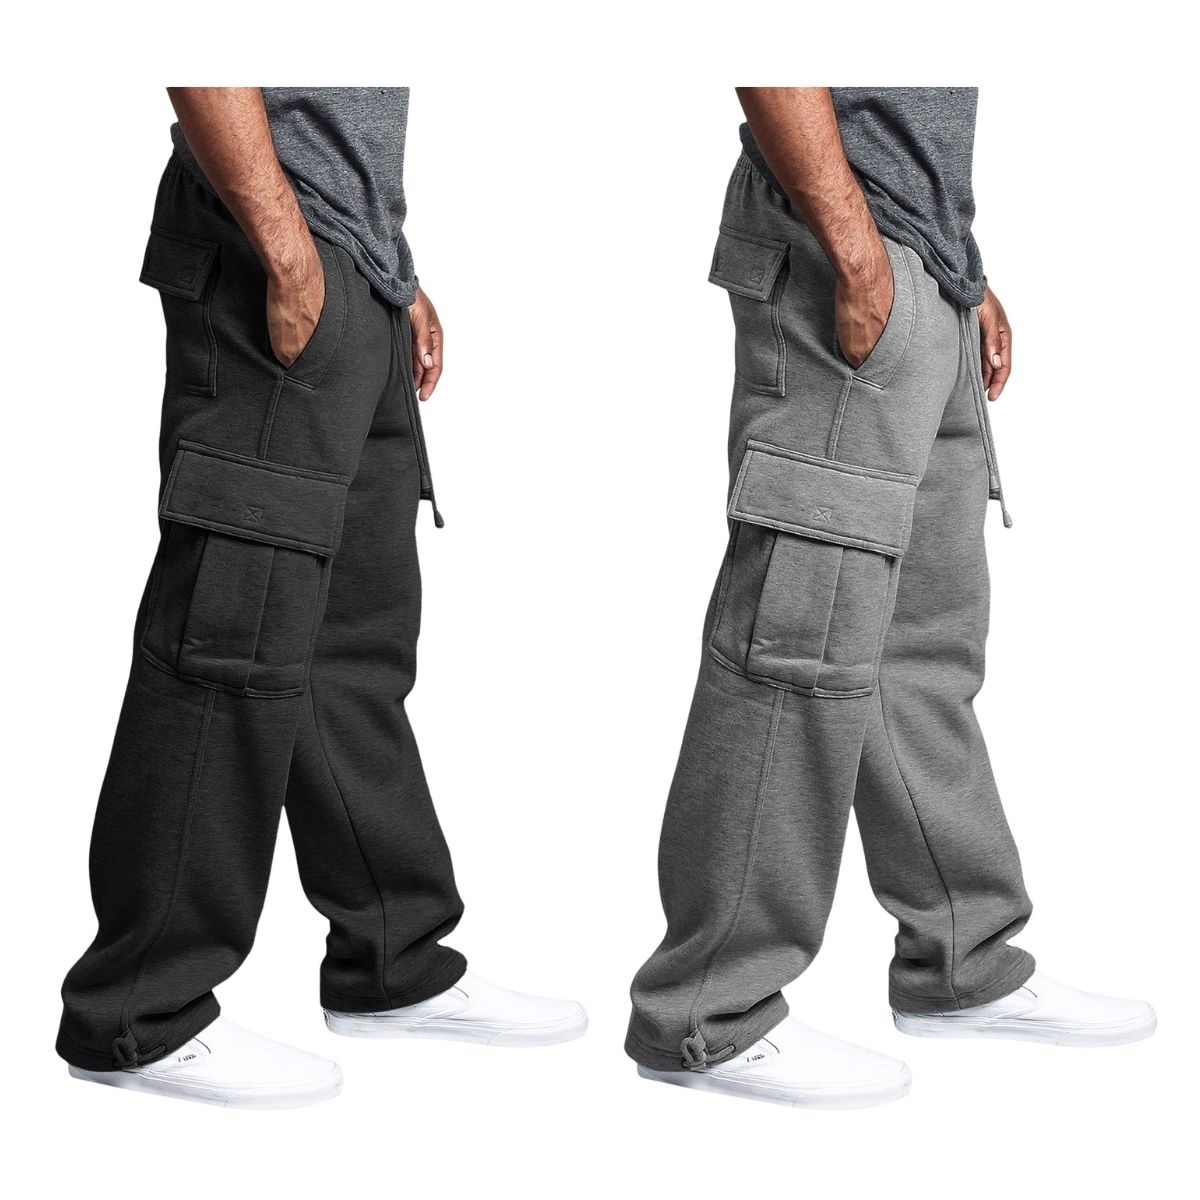 2-Pack: Men's Casual Solid Fleece Lined Cargo Jogger Soft Sweatpants With Pockets - Black&navy, Large